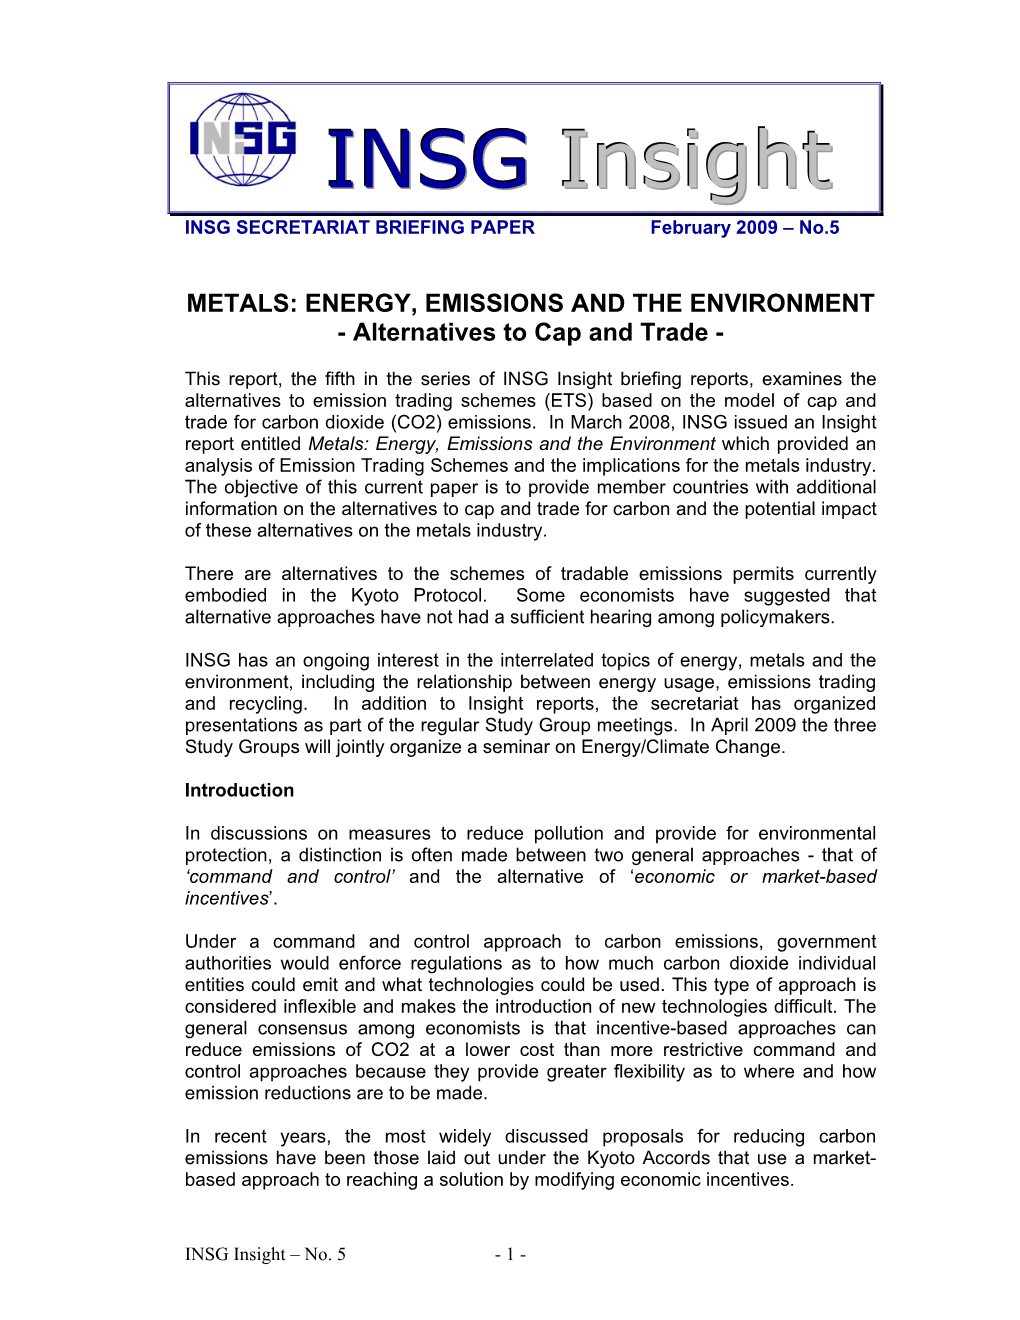 INSG Insight Briefing Reports, Examines the Alternatives to Emission Trading Schemes (ETS) Based on the Model of Cap and Trade for Carbon Dioxide (CO2) Emissions